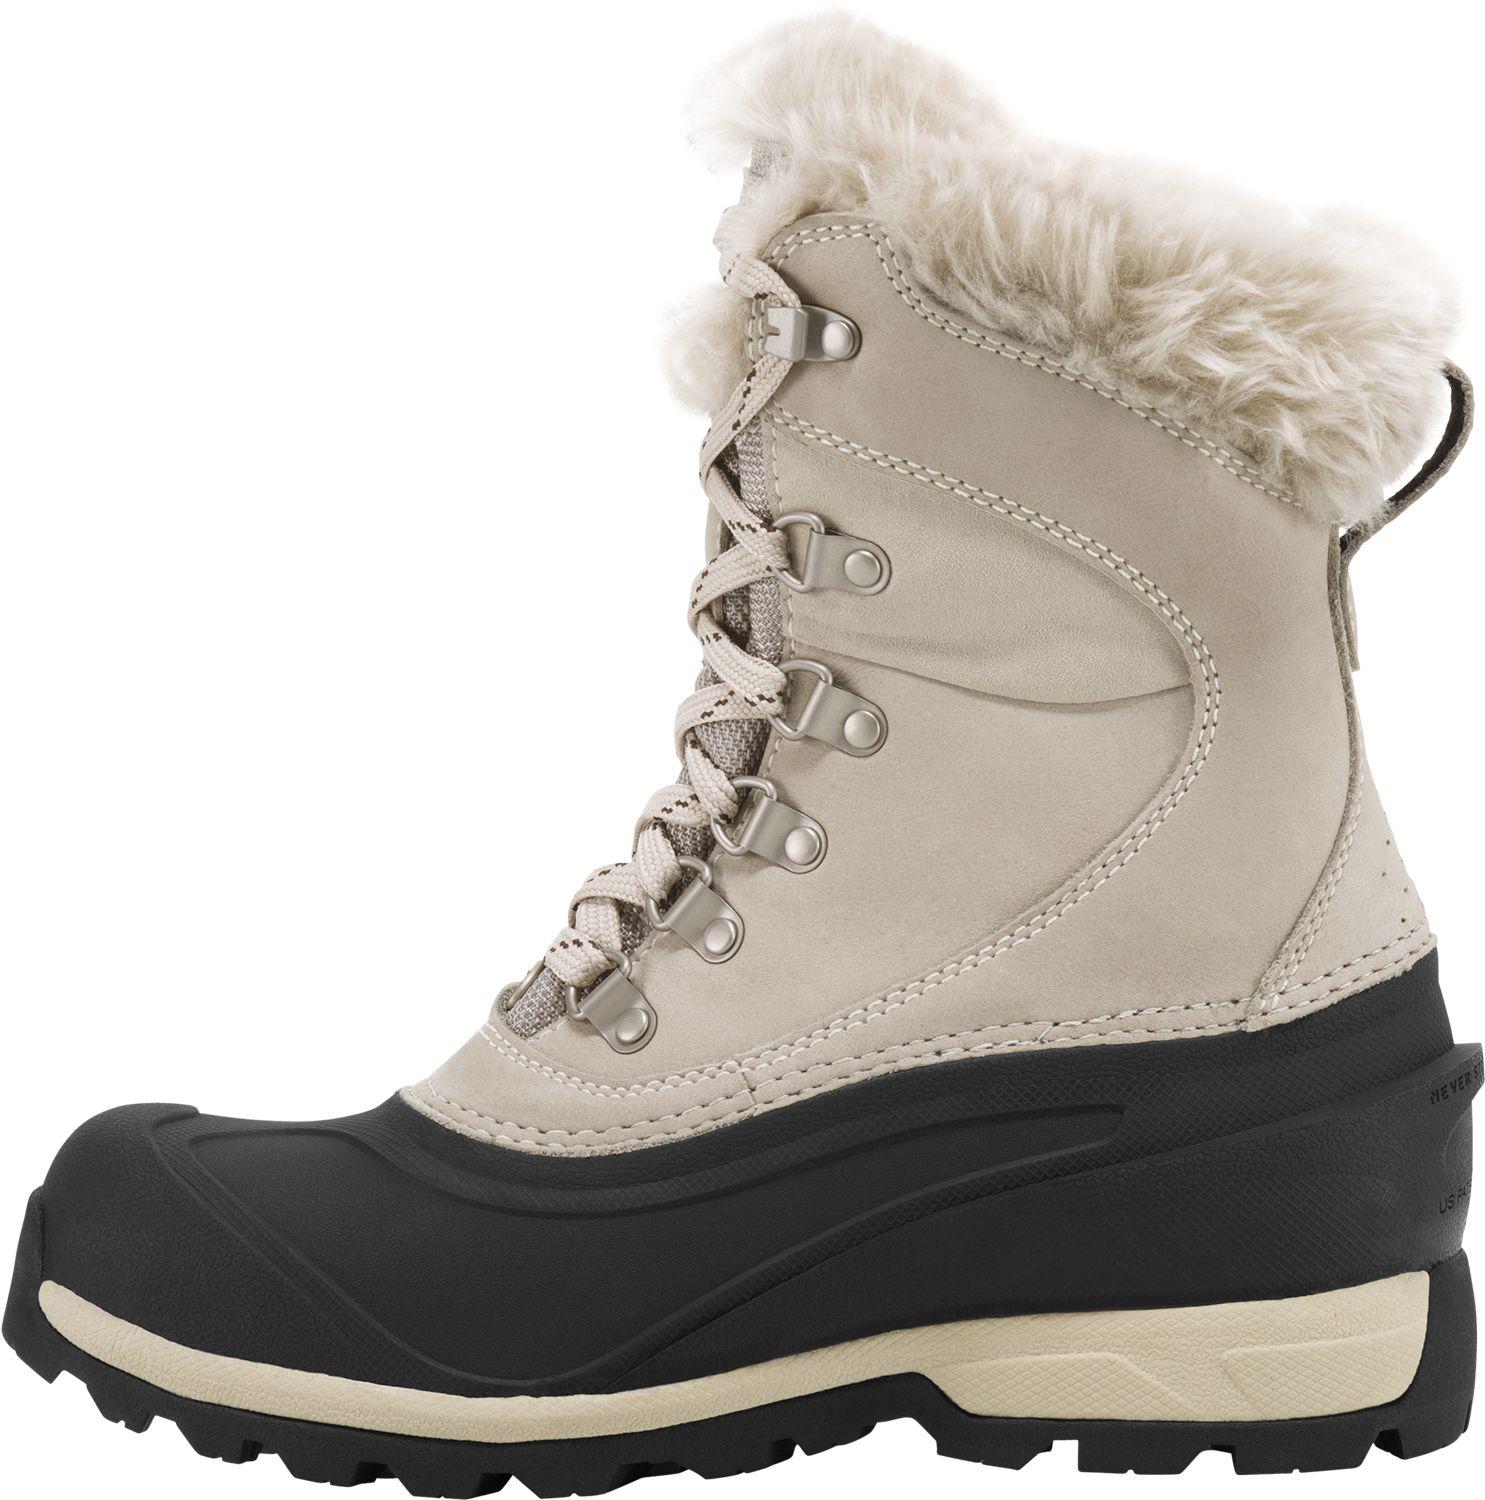 north face waterproof snow boots